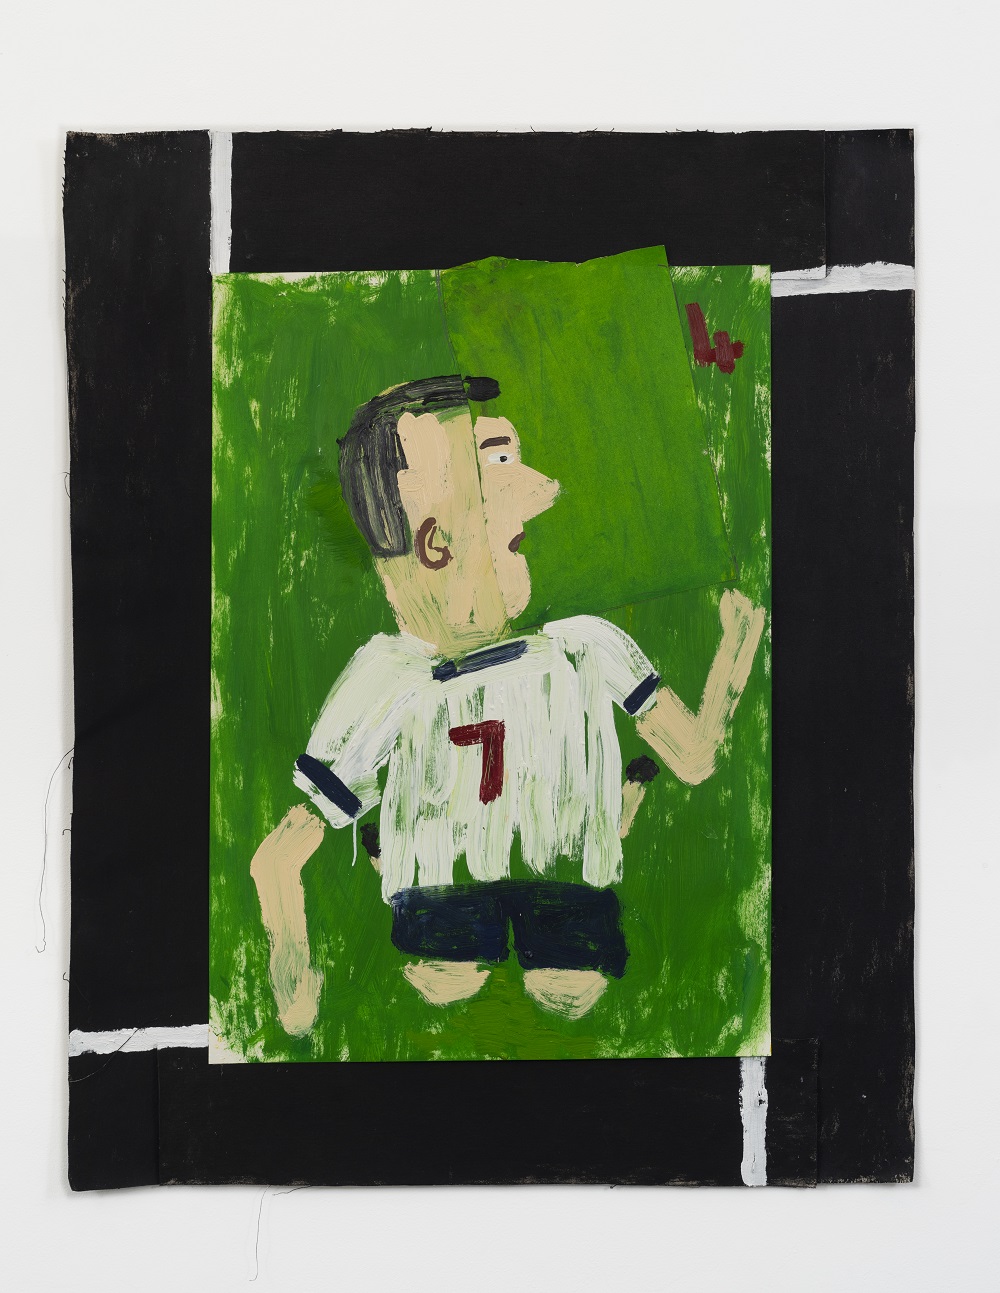 Rose Wylie Tottenham Colours, 4 Goals 2020 (Photo by Jo Moon Price), Private collection